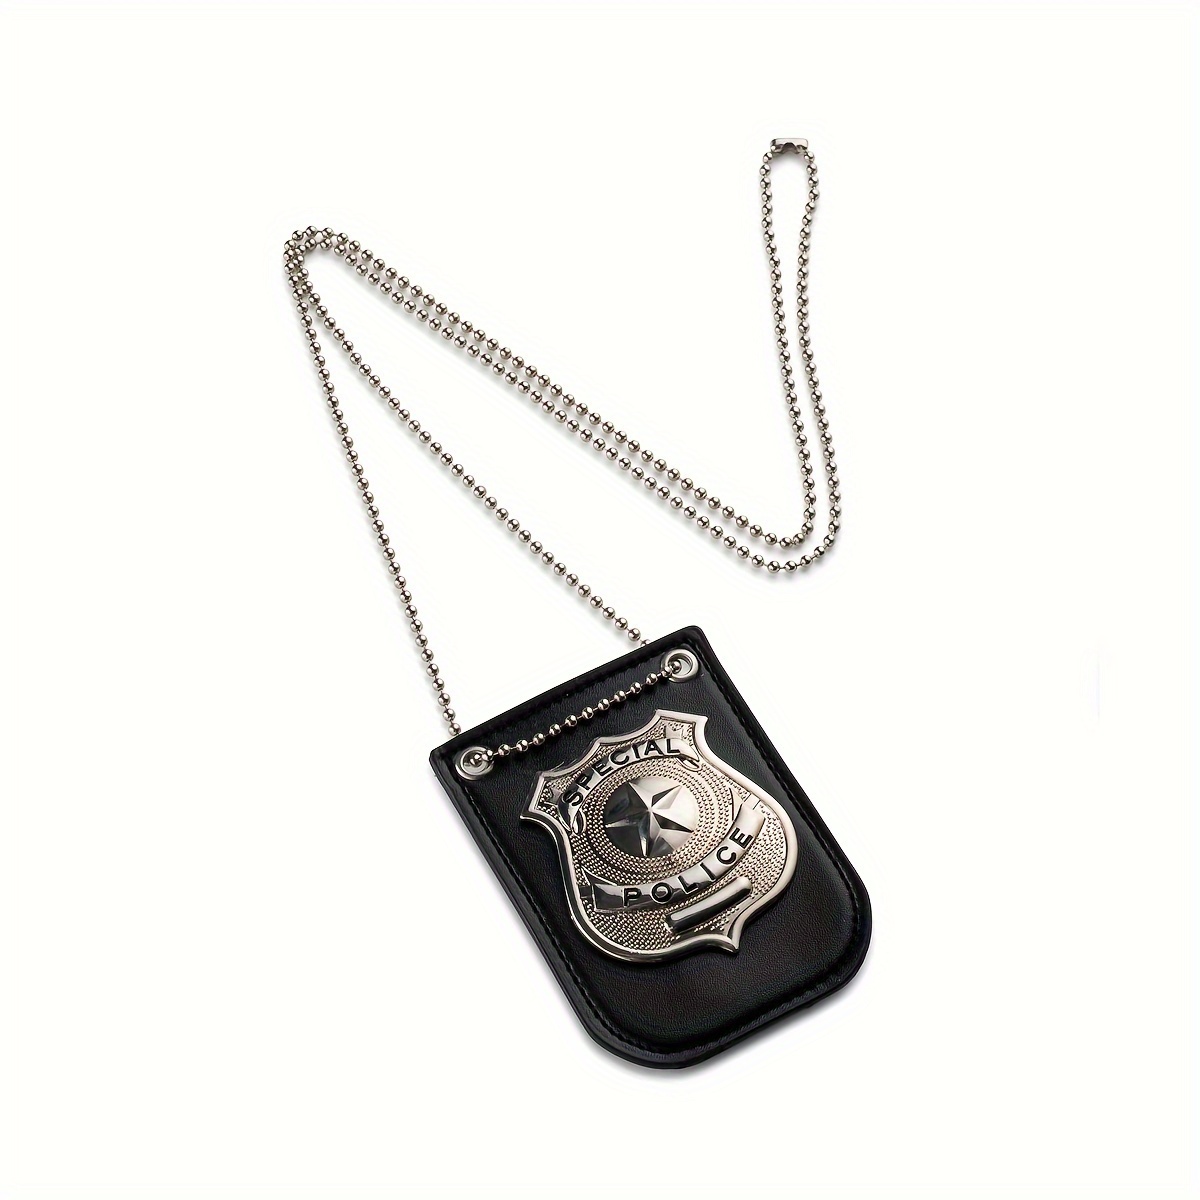 Police Officer Gifts - Temu